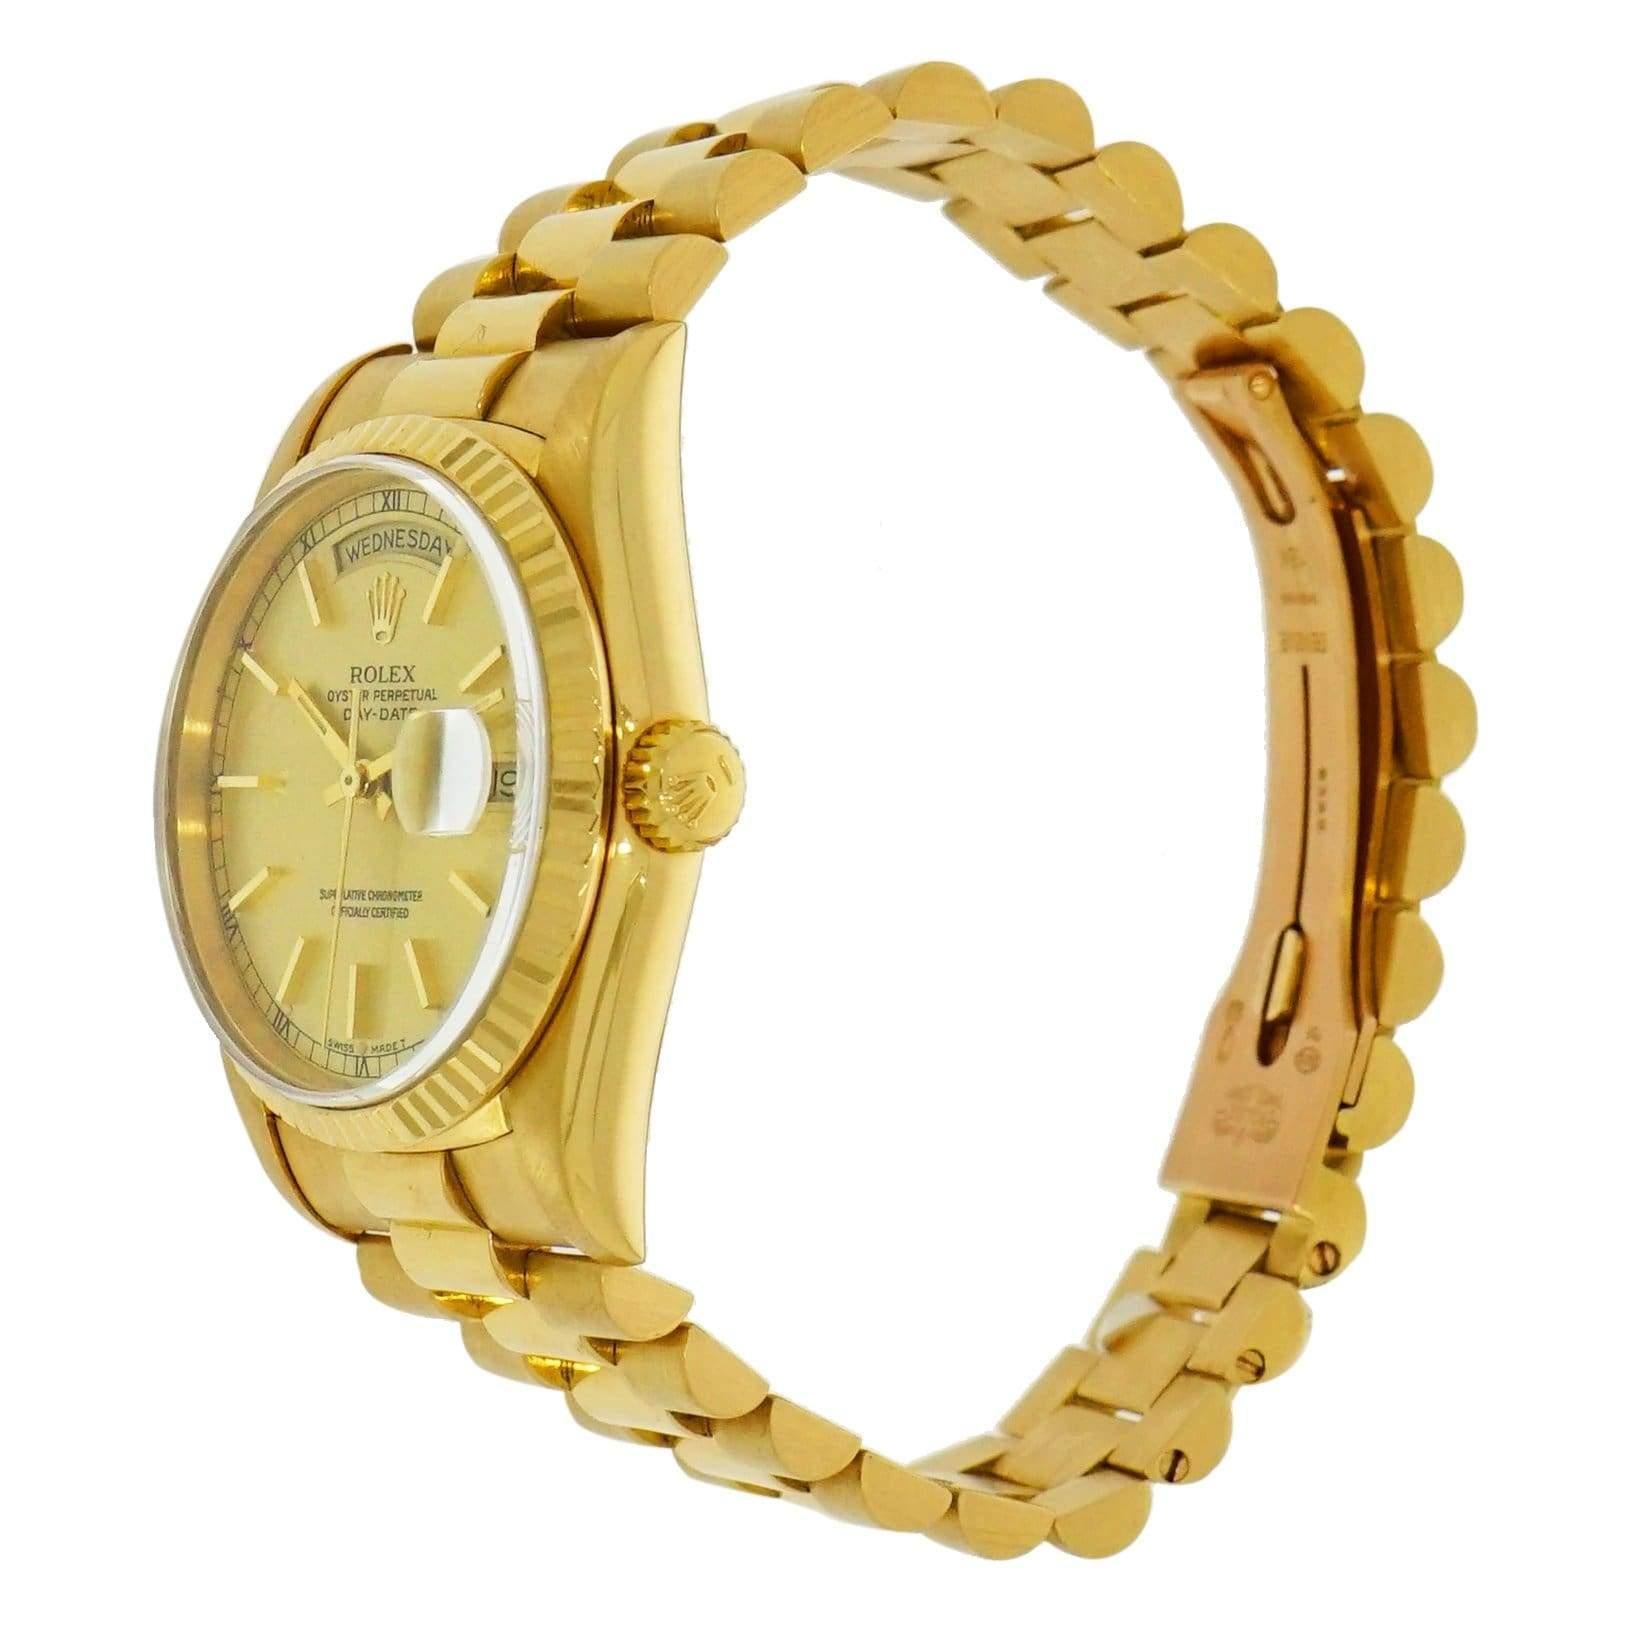 Excellent condition pre-owned Vintage Rolex Day-Date, 36mm case, certified Chronometer automatic self-winding movement, Champagne dial with yellow gold index markers, date at 3 o’clock, sapphire crystal on 18 Karat Yellow Gold bracelet. This watch